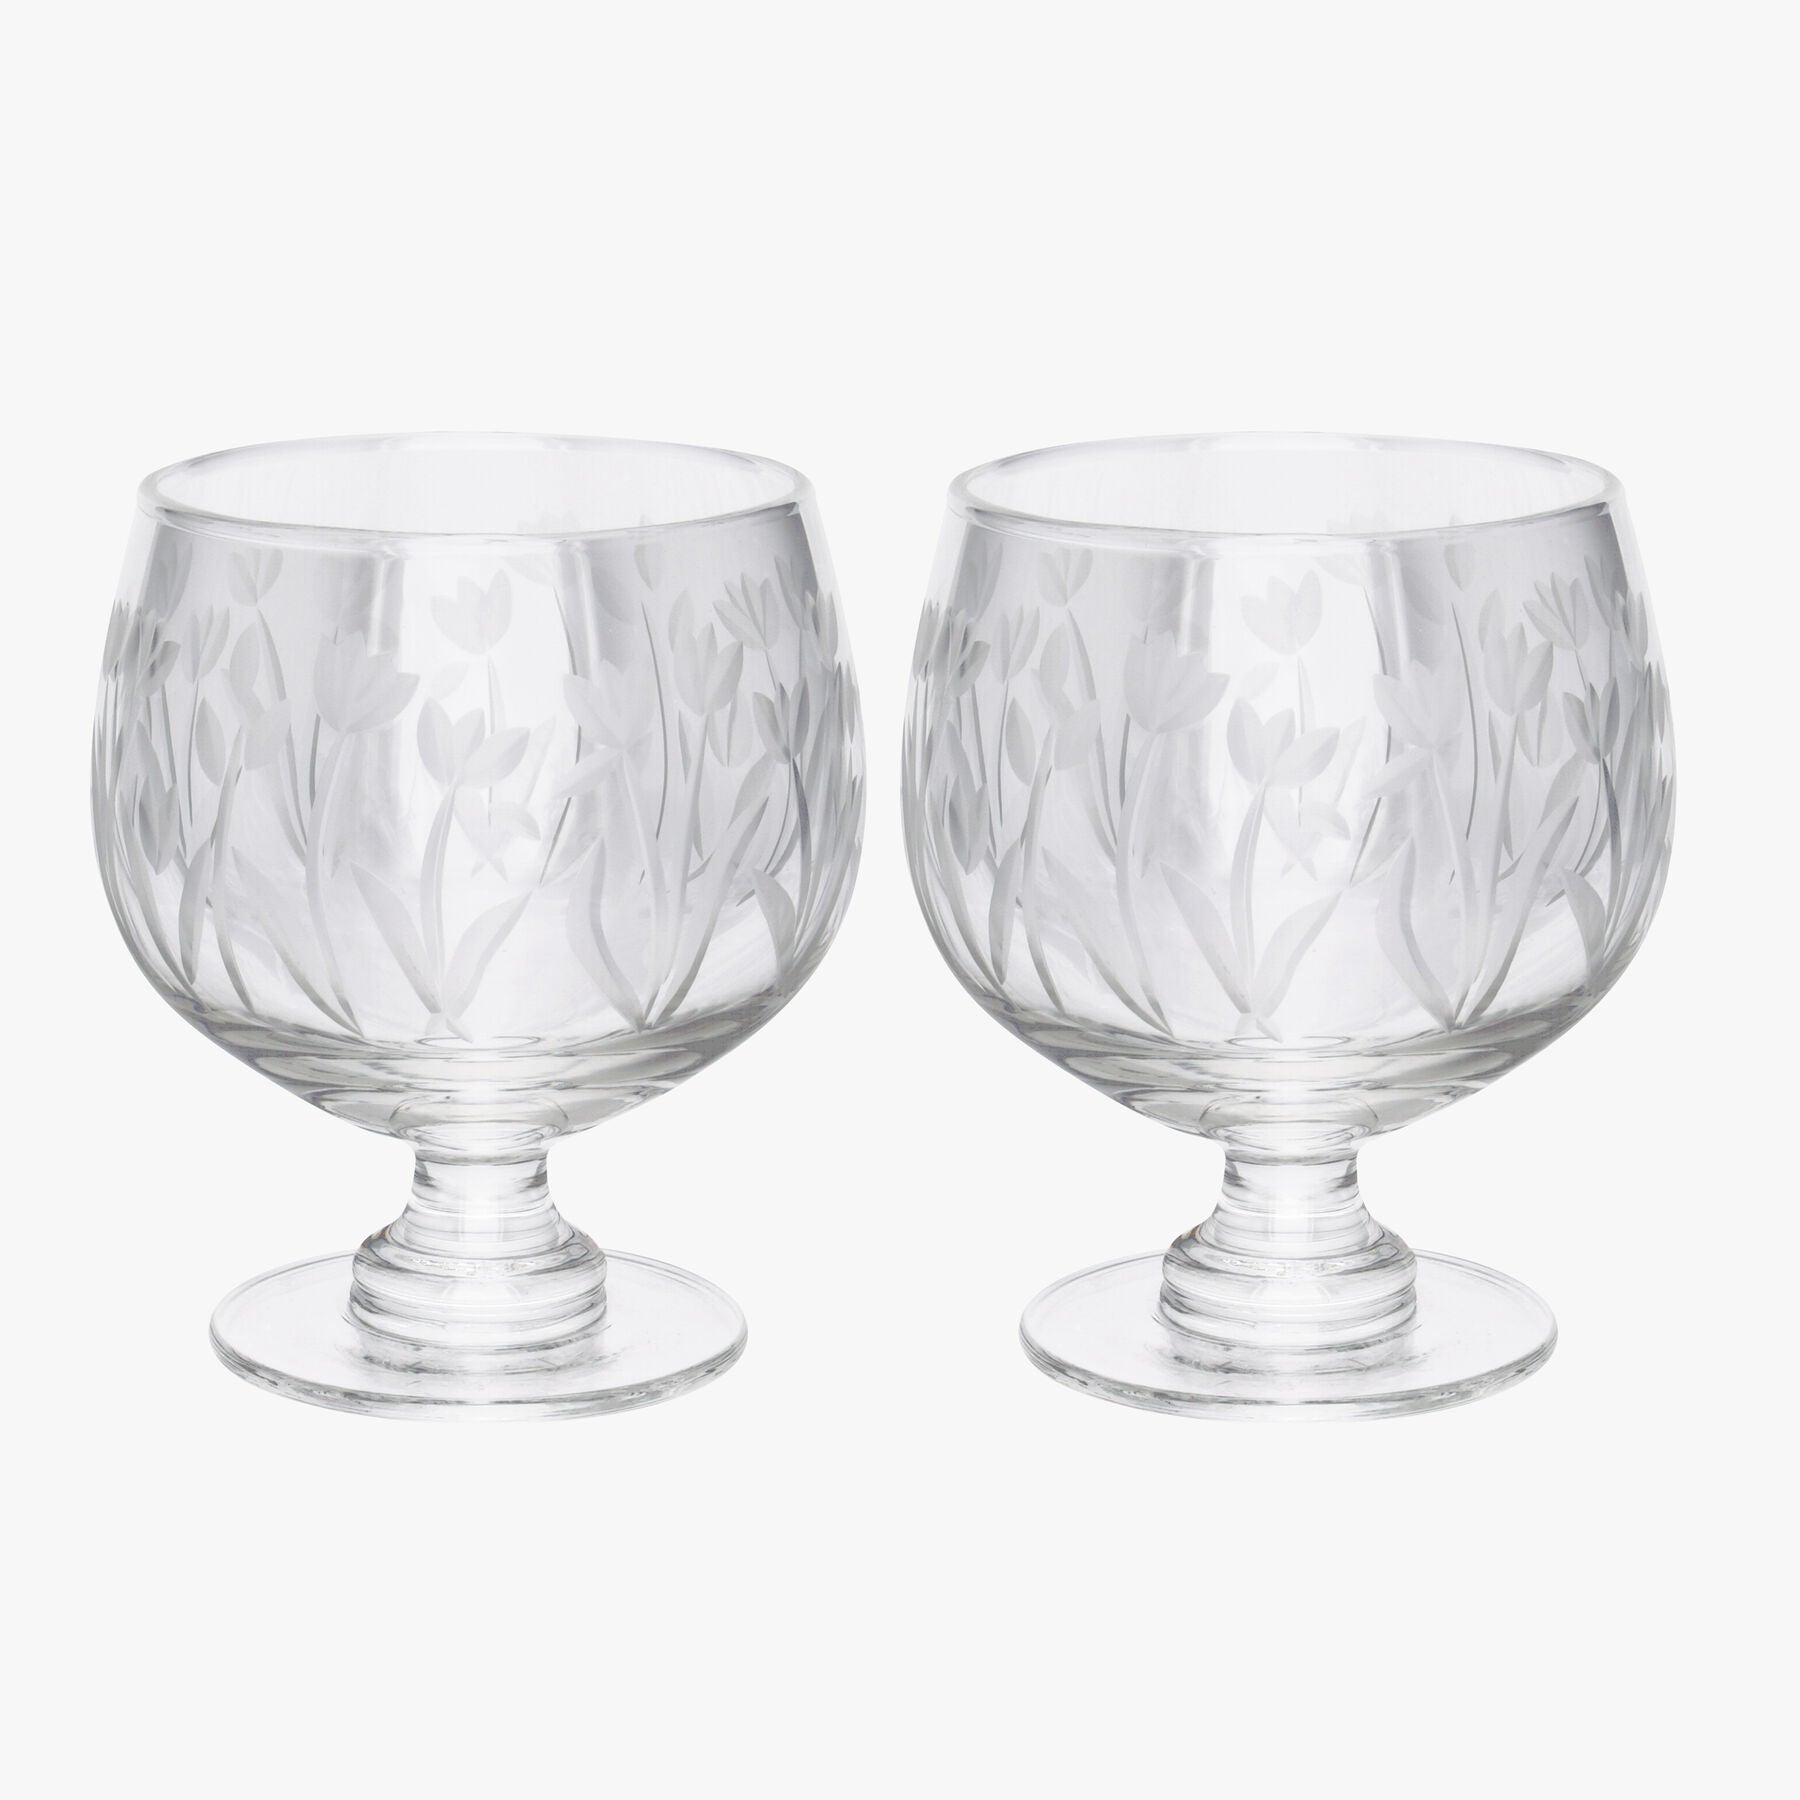 Golden Tulips Set Of 2 Gin Glasses - Unique Hand-Etched Piece Glass  | Emma Bridgewater